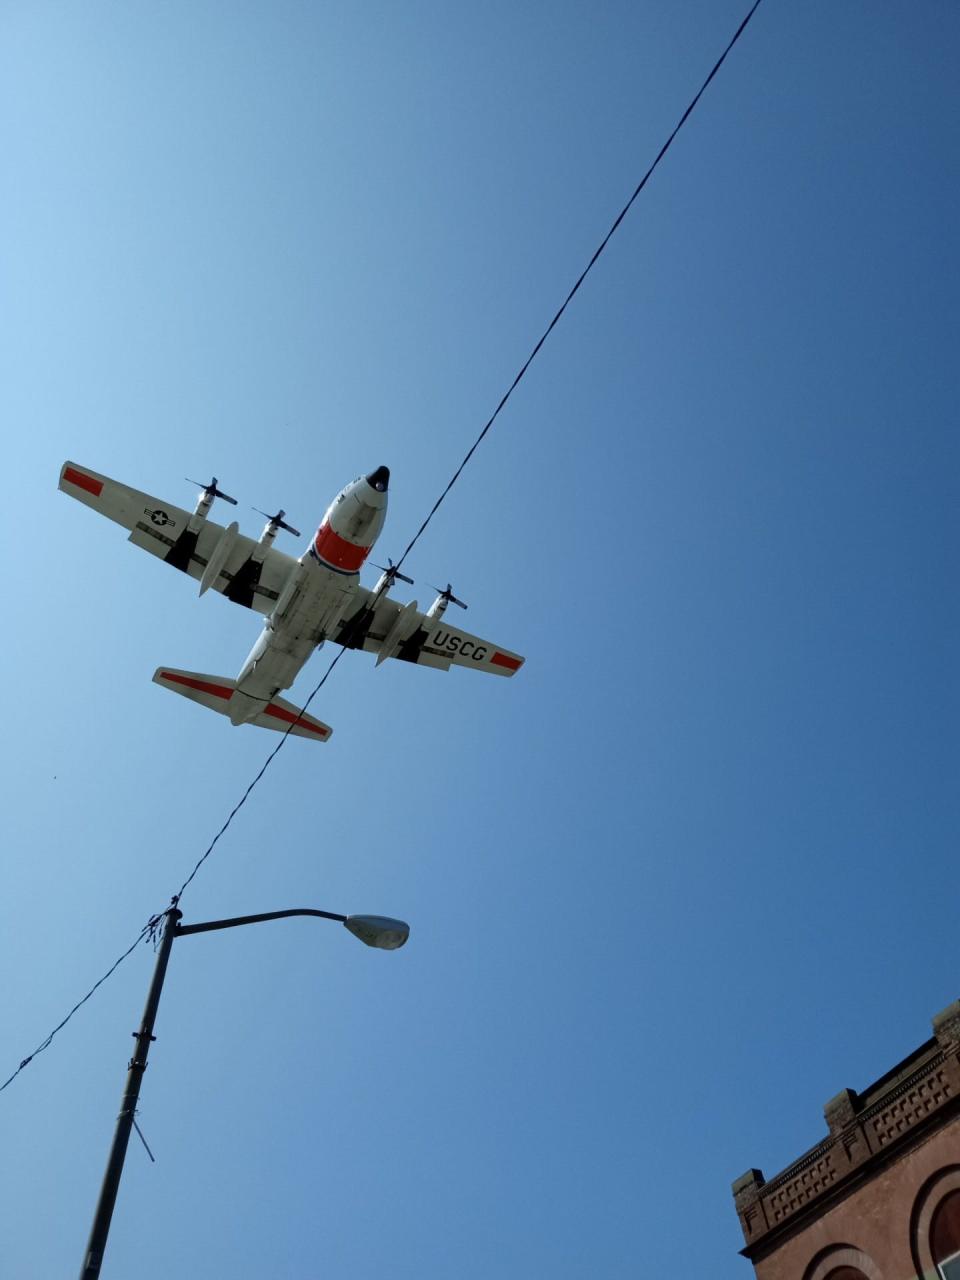 Lt. Commander Kyle Richter, U.S. Coast Guard and a Honesdale graduate, conducted a fly-over at the start of Honesdale's Memorial Day parade.